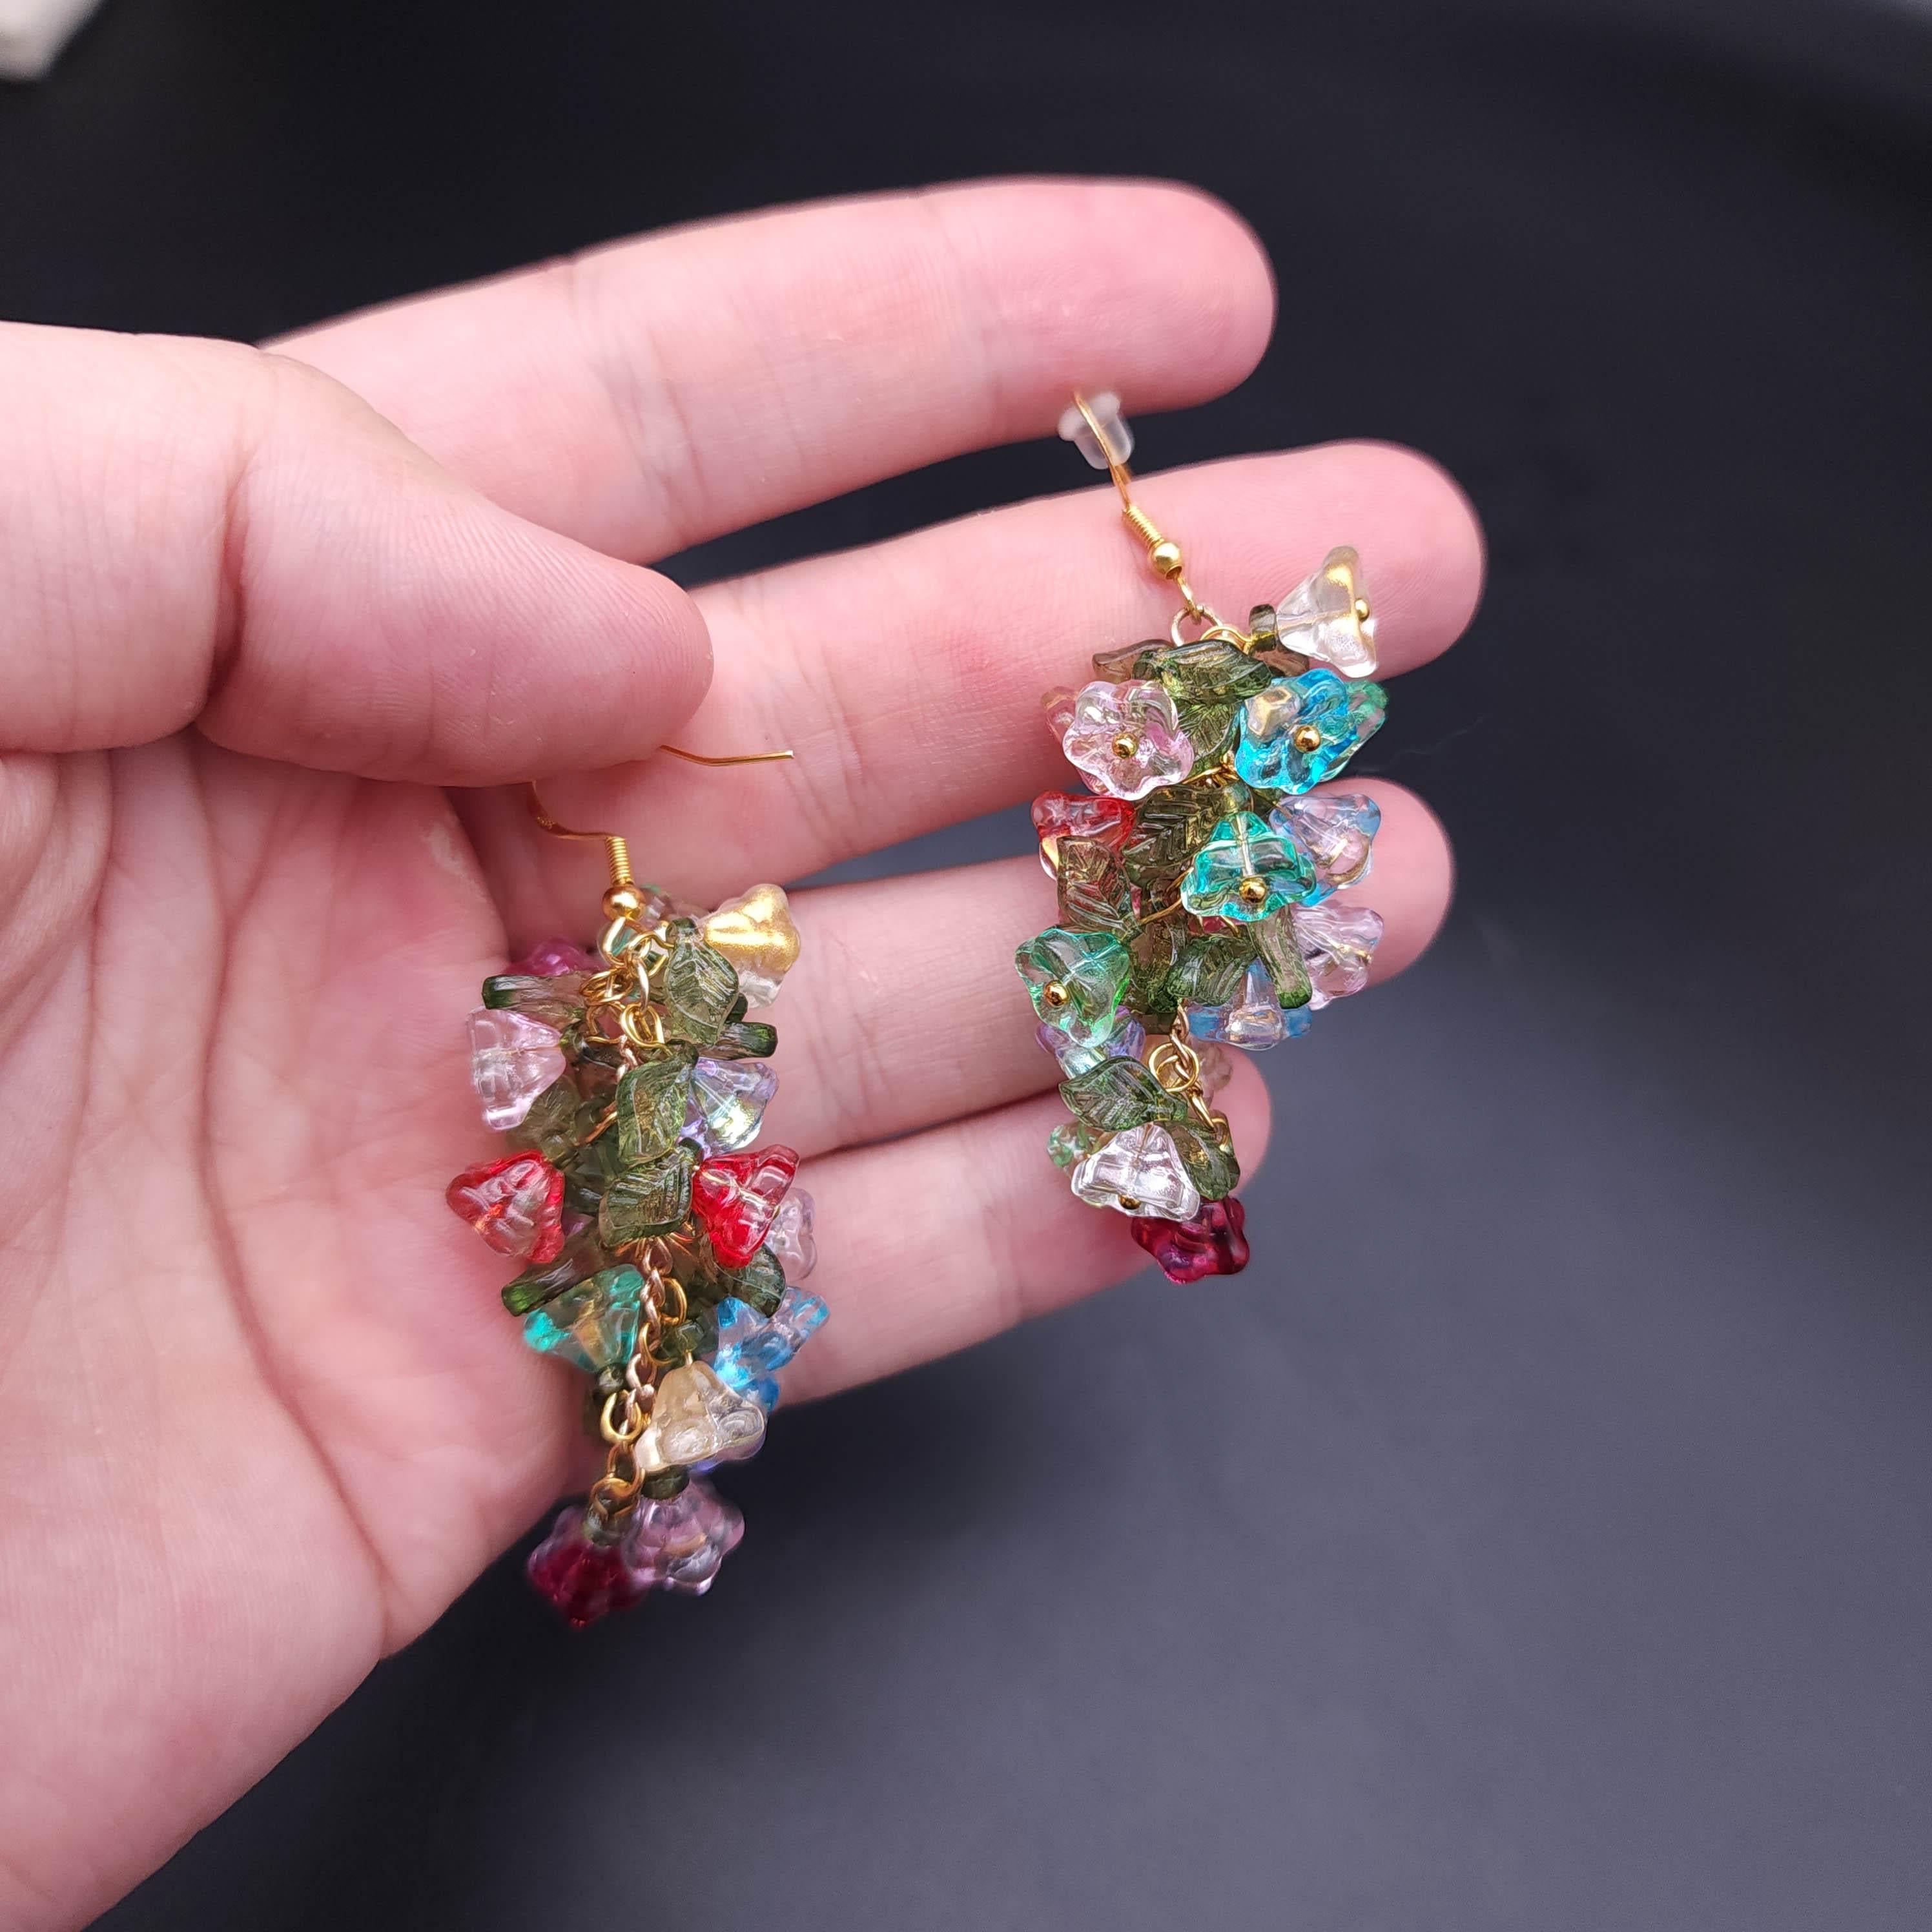 Add a splash of color and sparkle to your wardrobe with these stunning colorful Swarovski flower cluster dangle earrings. Each earring is a masterpiece, featuring a vibrant bouquet of Swarovski crystals that shimmer with every movement. These